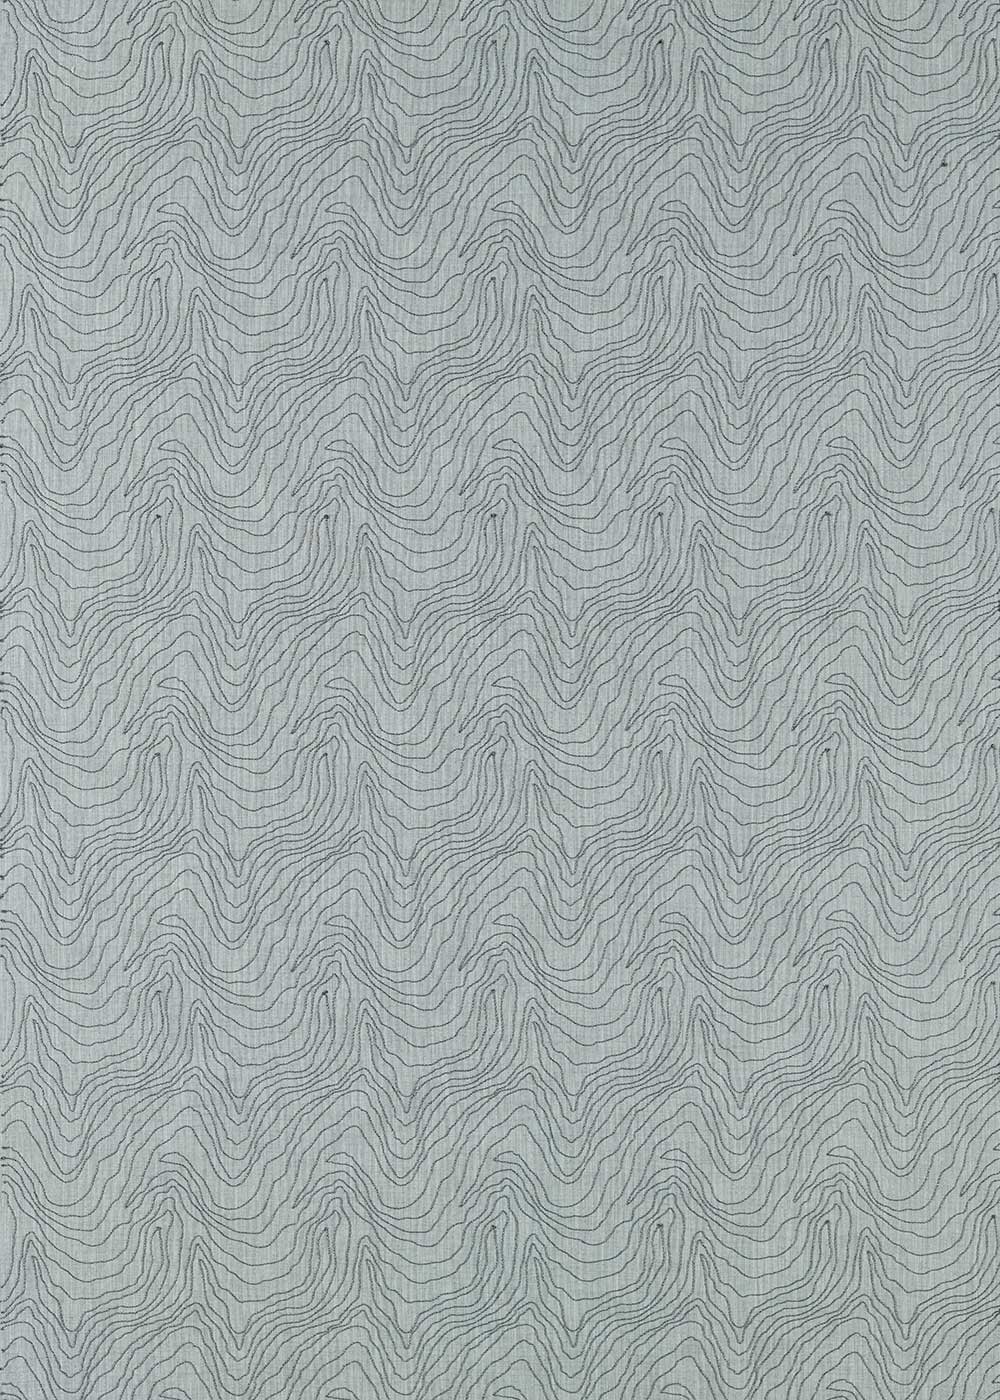 Formation Fabric - Silver  - by Harlequin